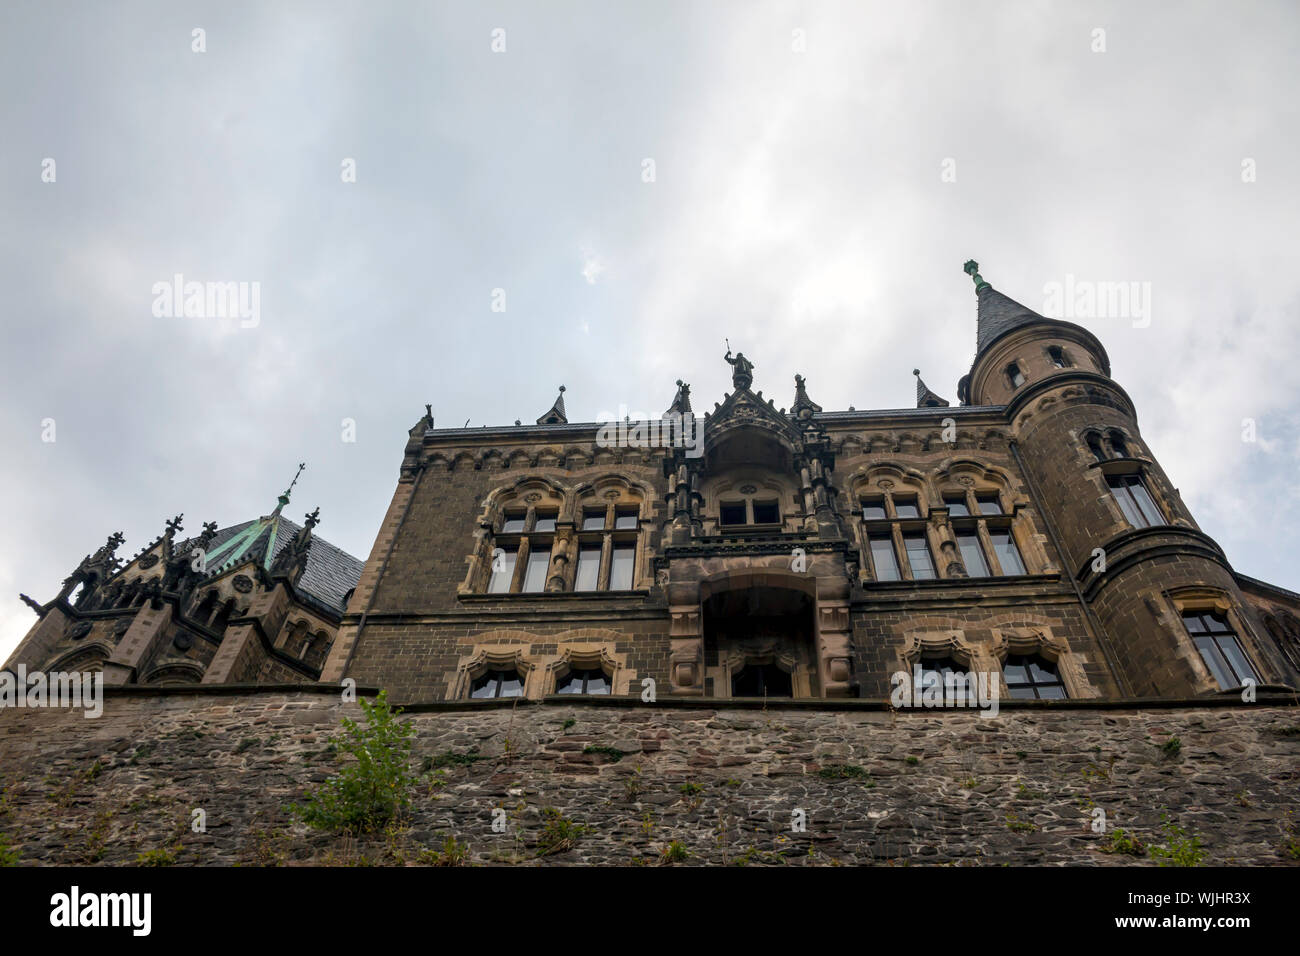 Wernigerode Castle located in the Harz mountains Stock Photo